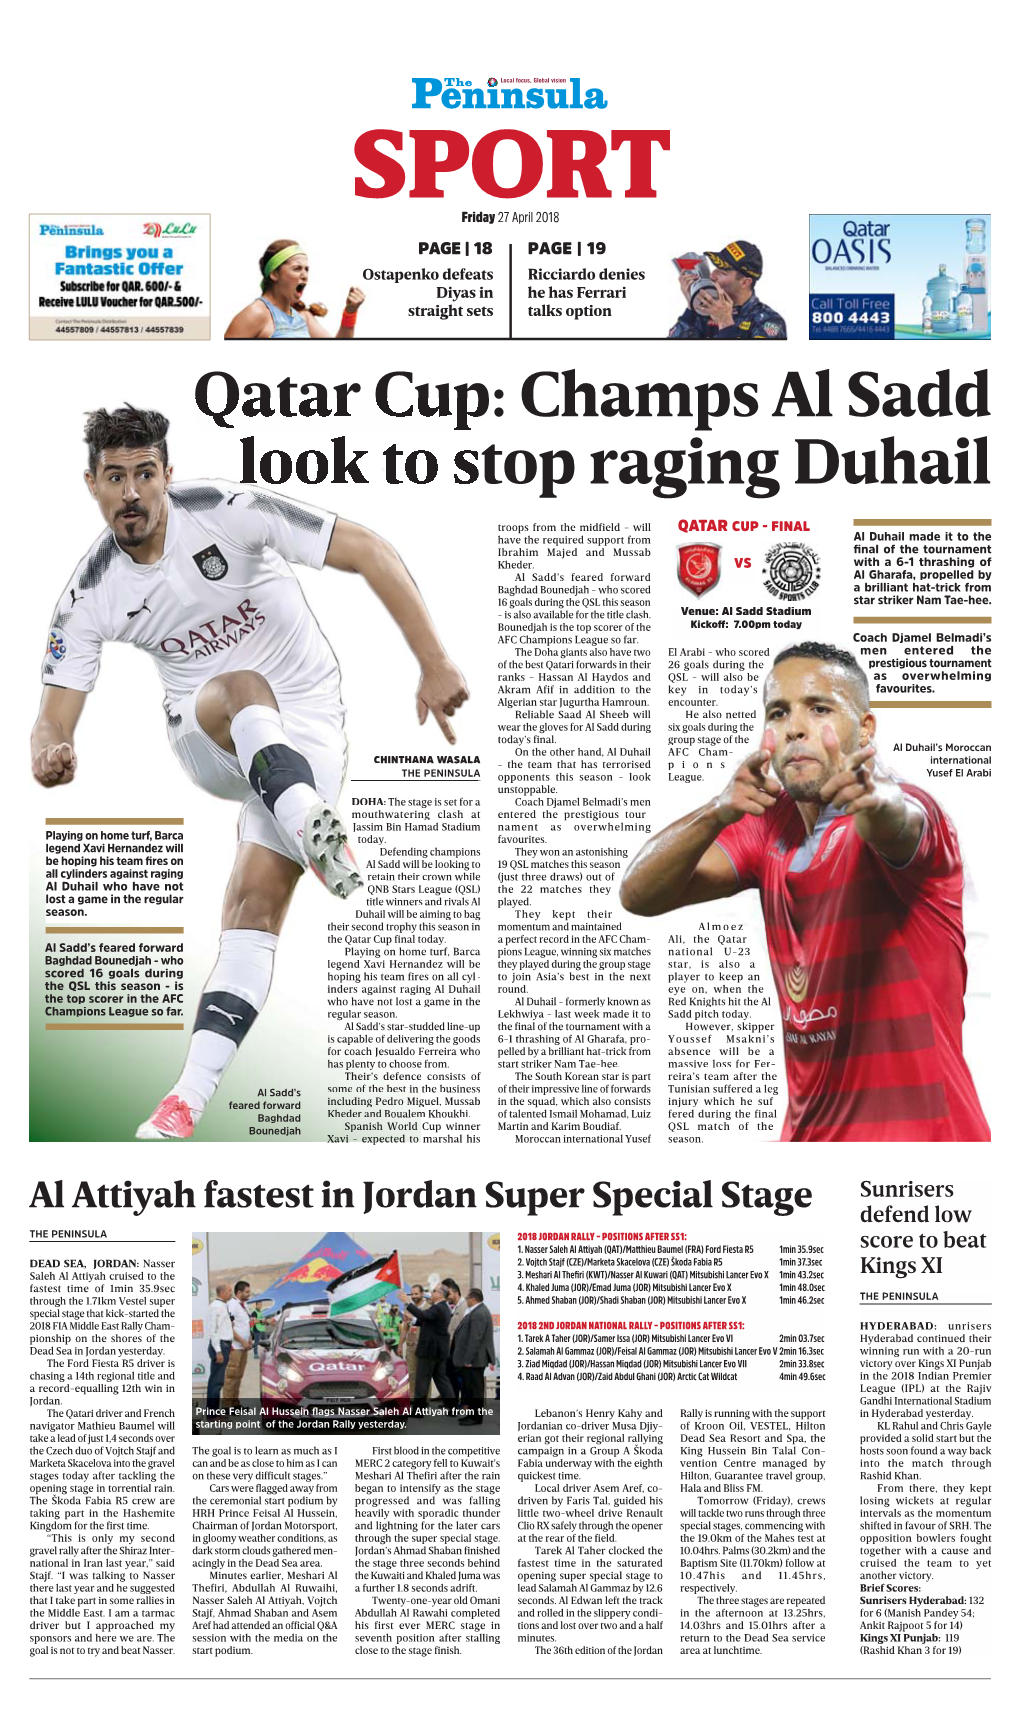 Champs Al Sadd Look to Stop Raging Duhail